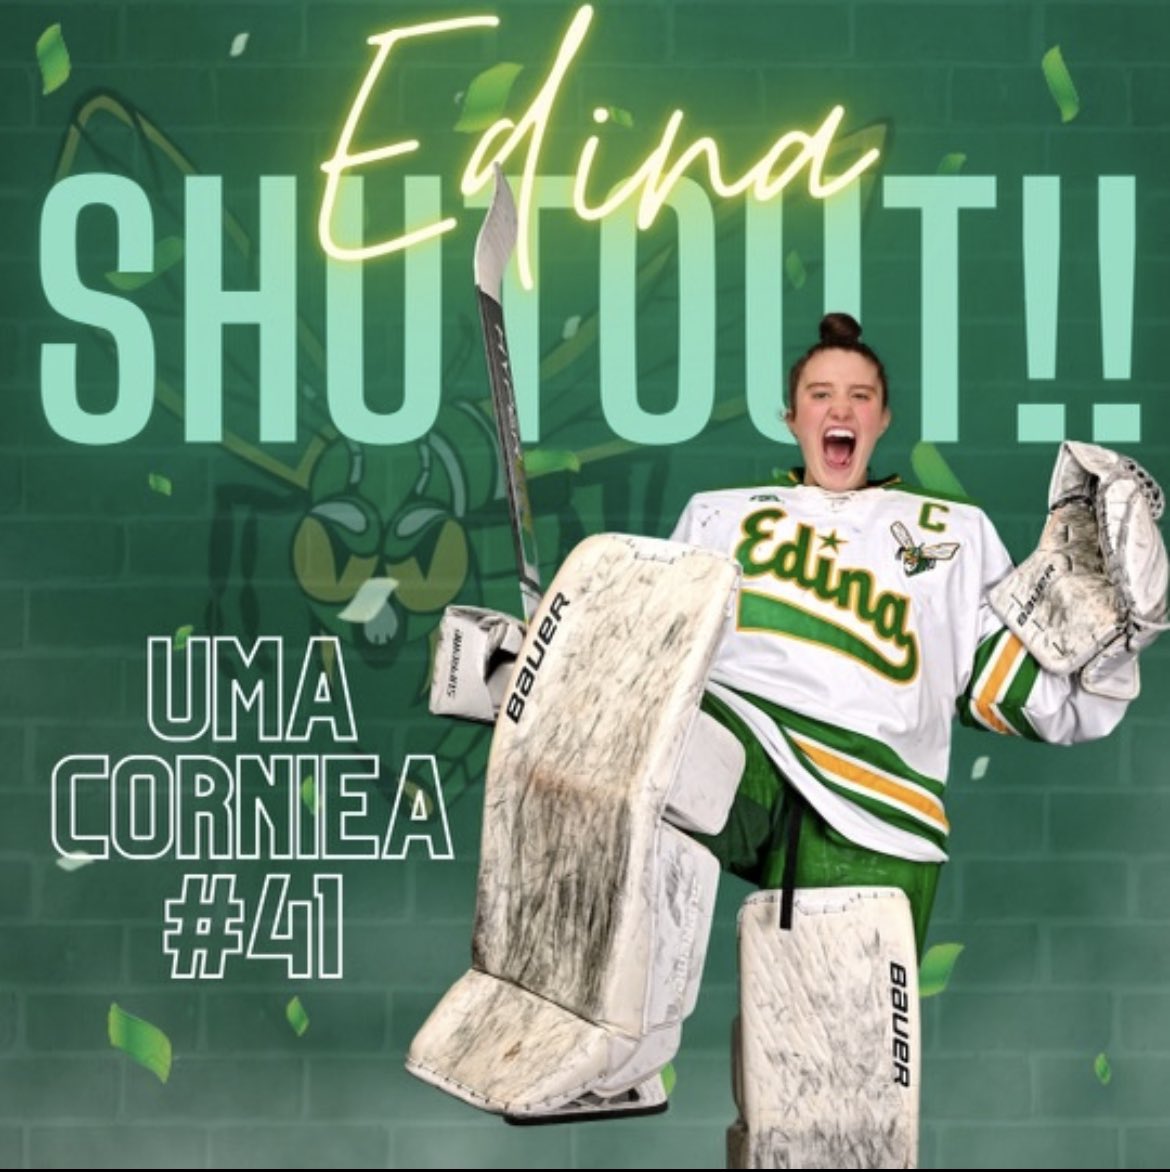 And that’s an EDINA WIN IN THE QUATERFINALS OF THE STATE TOURNAMENT!!! UMA ALSO WITH A HUGE SHUT OUT!!! #whatateam